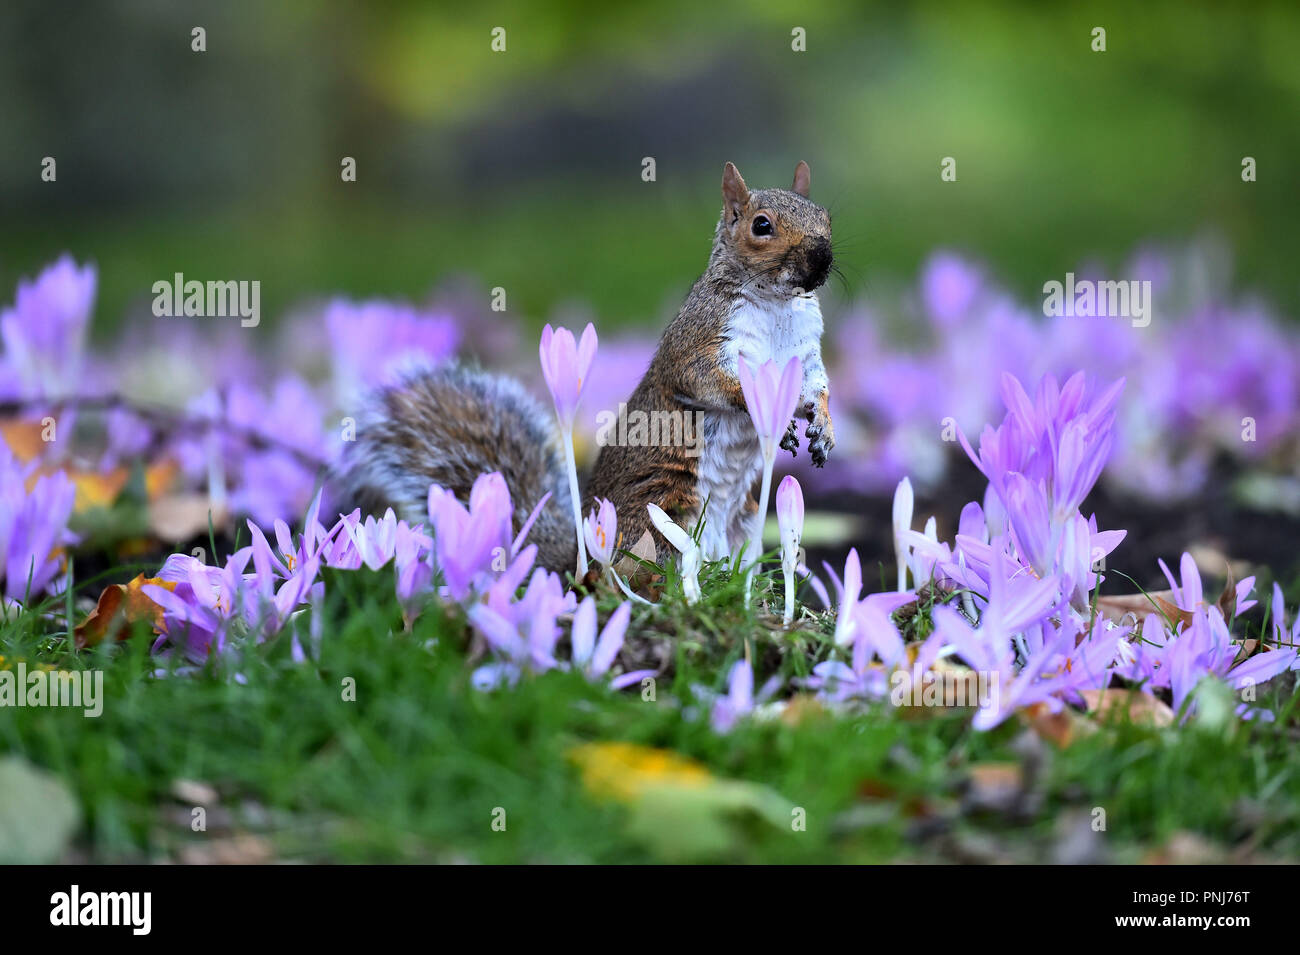 A Squirrel amongst the flowers in St James's Park, London. Heavy rainfall and powerful gusts brought by Storm Bronagh are set to ease over the weekend as the weather system moves into the North Sea, forecasters have said. Stock Photo